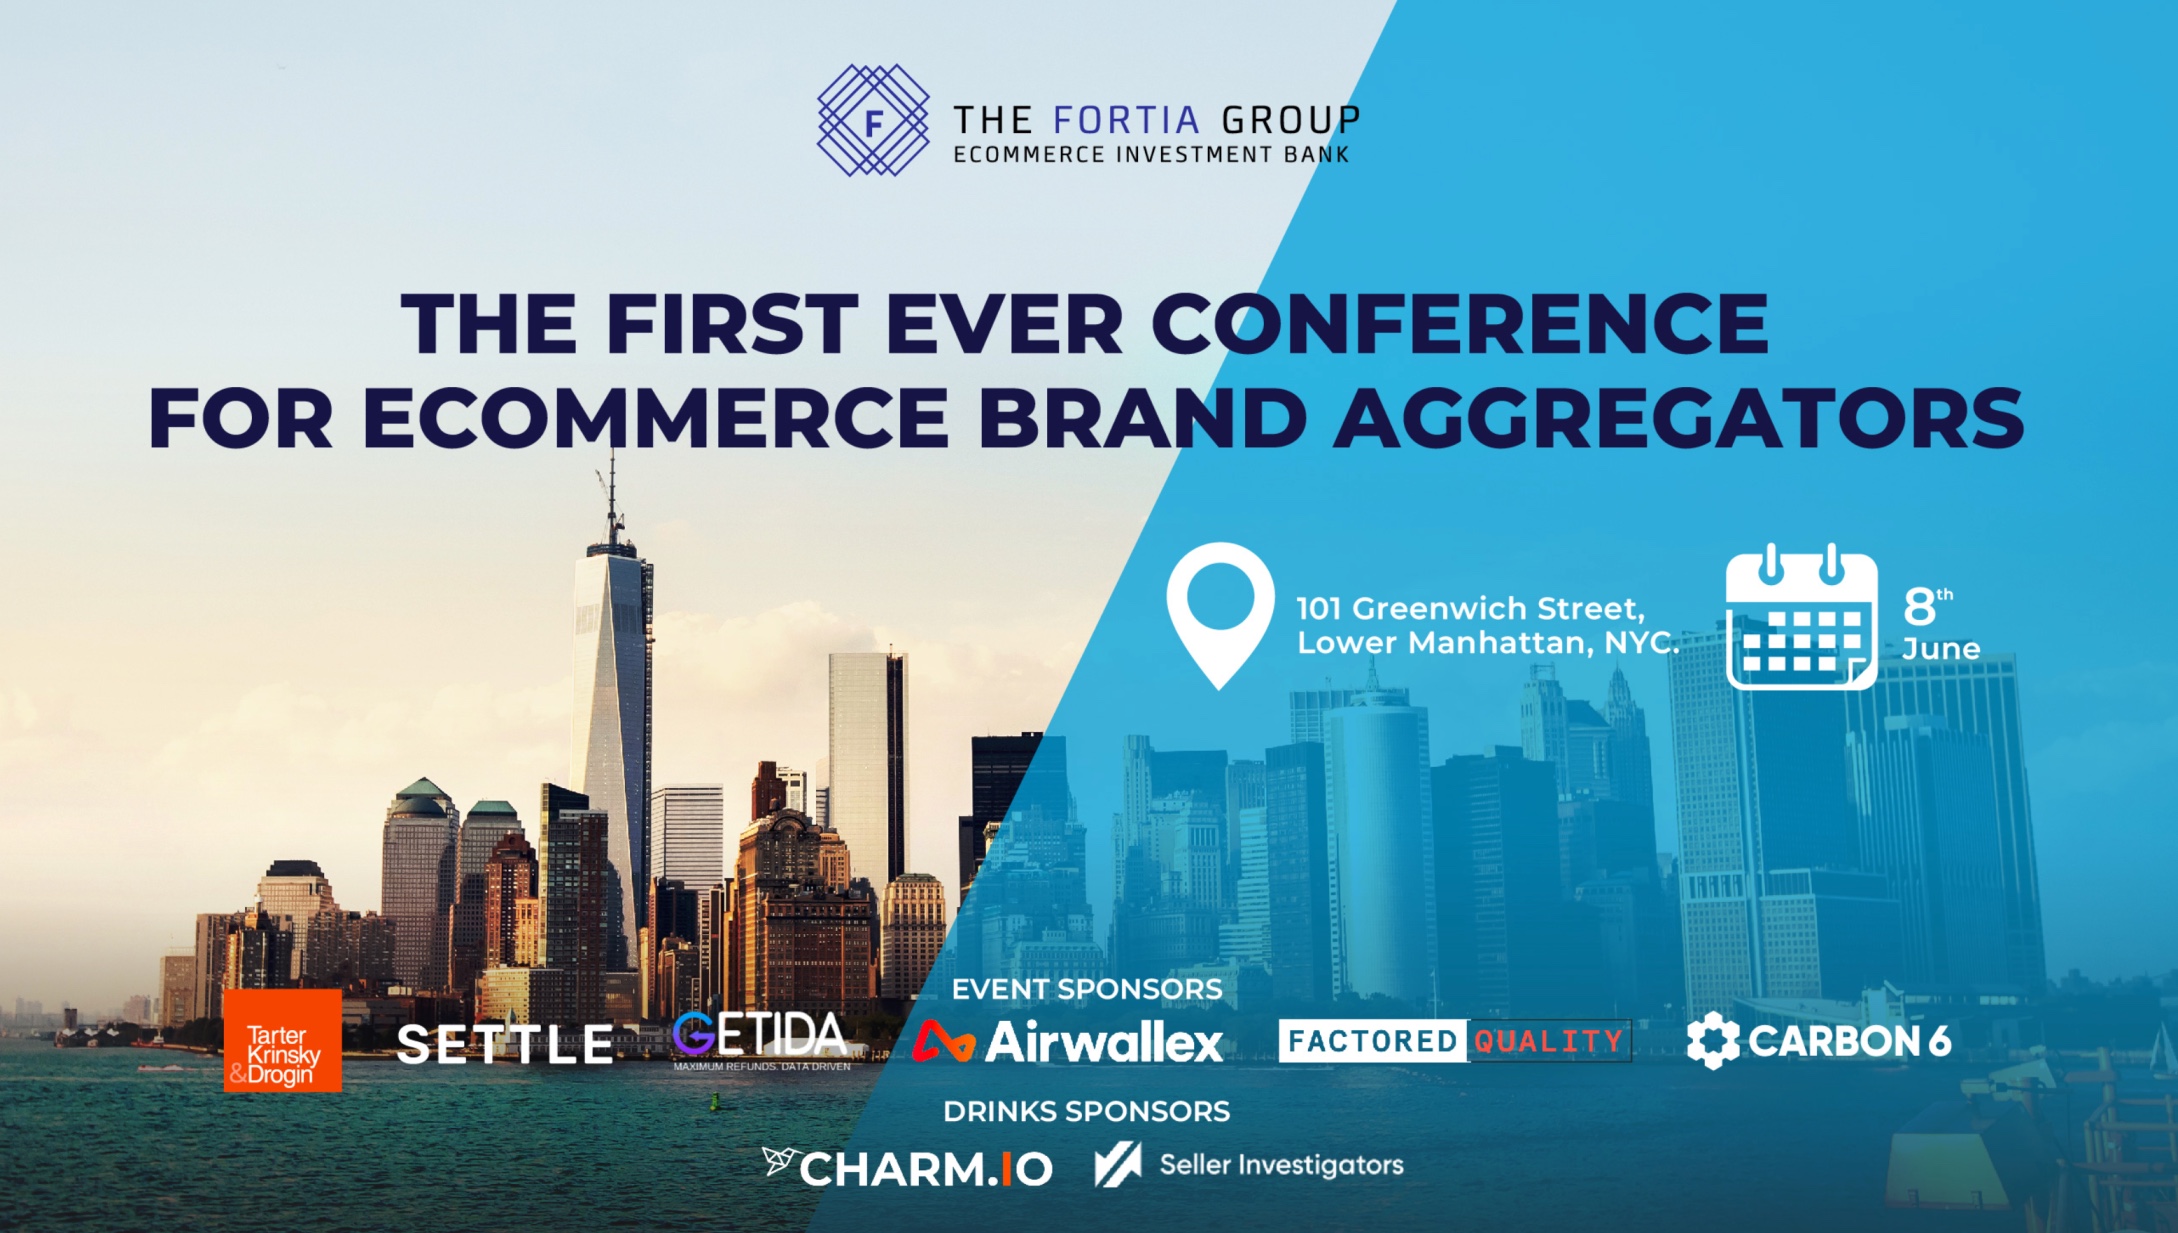 "Key Takeaways From The First Ever Conference For eCommerce Brand Acquirors”